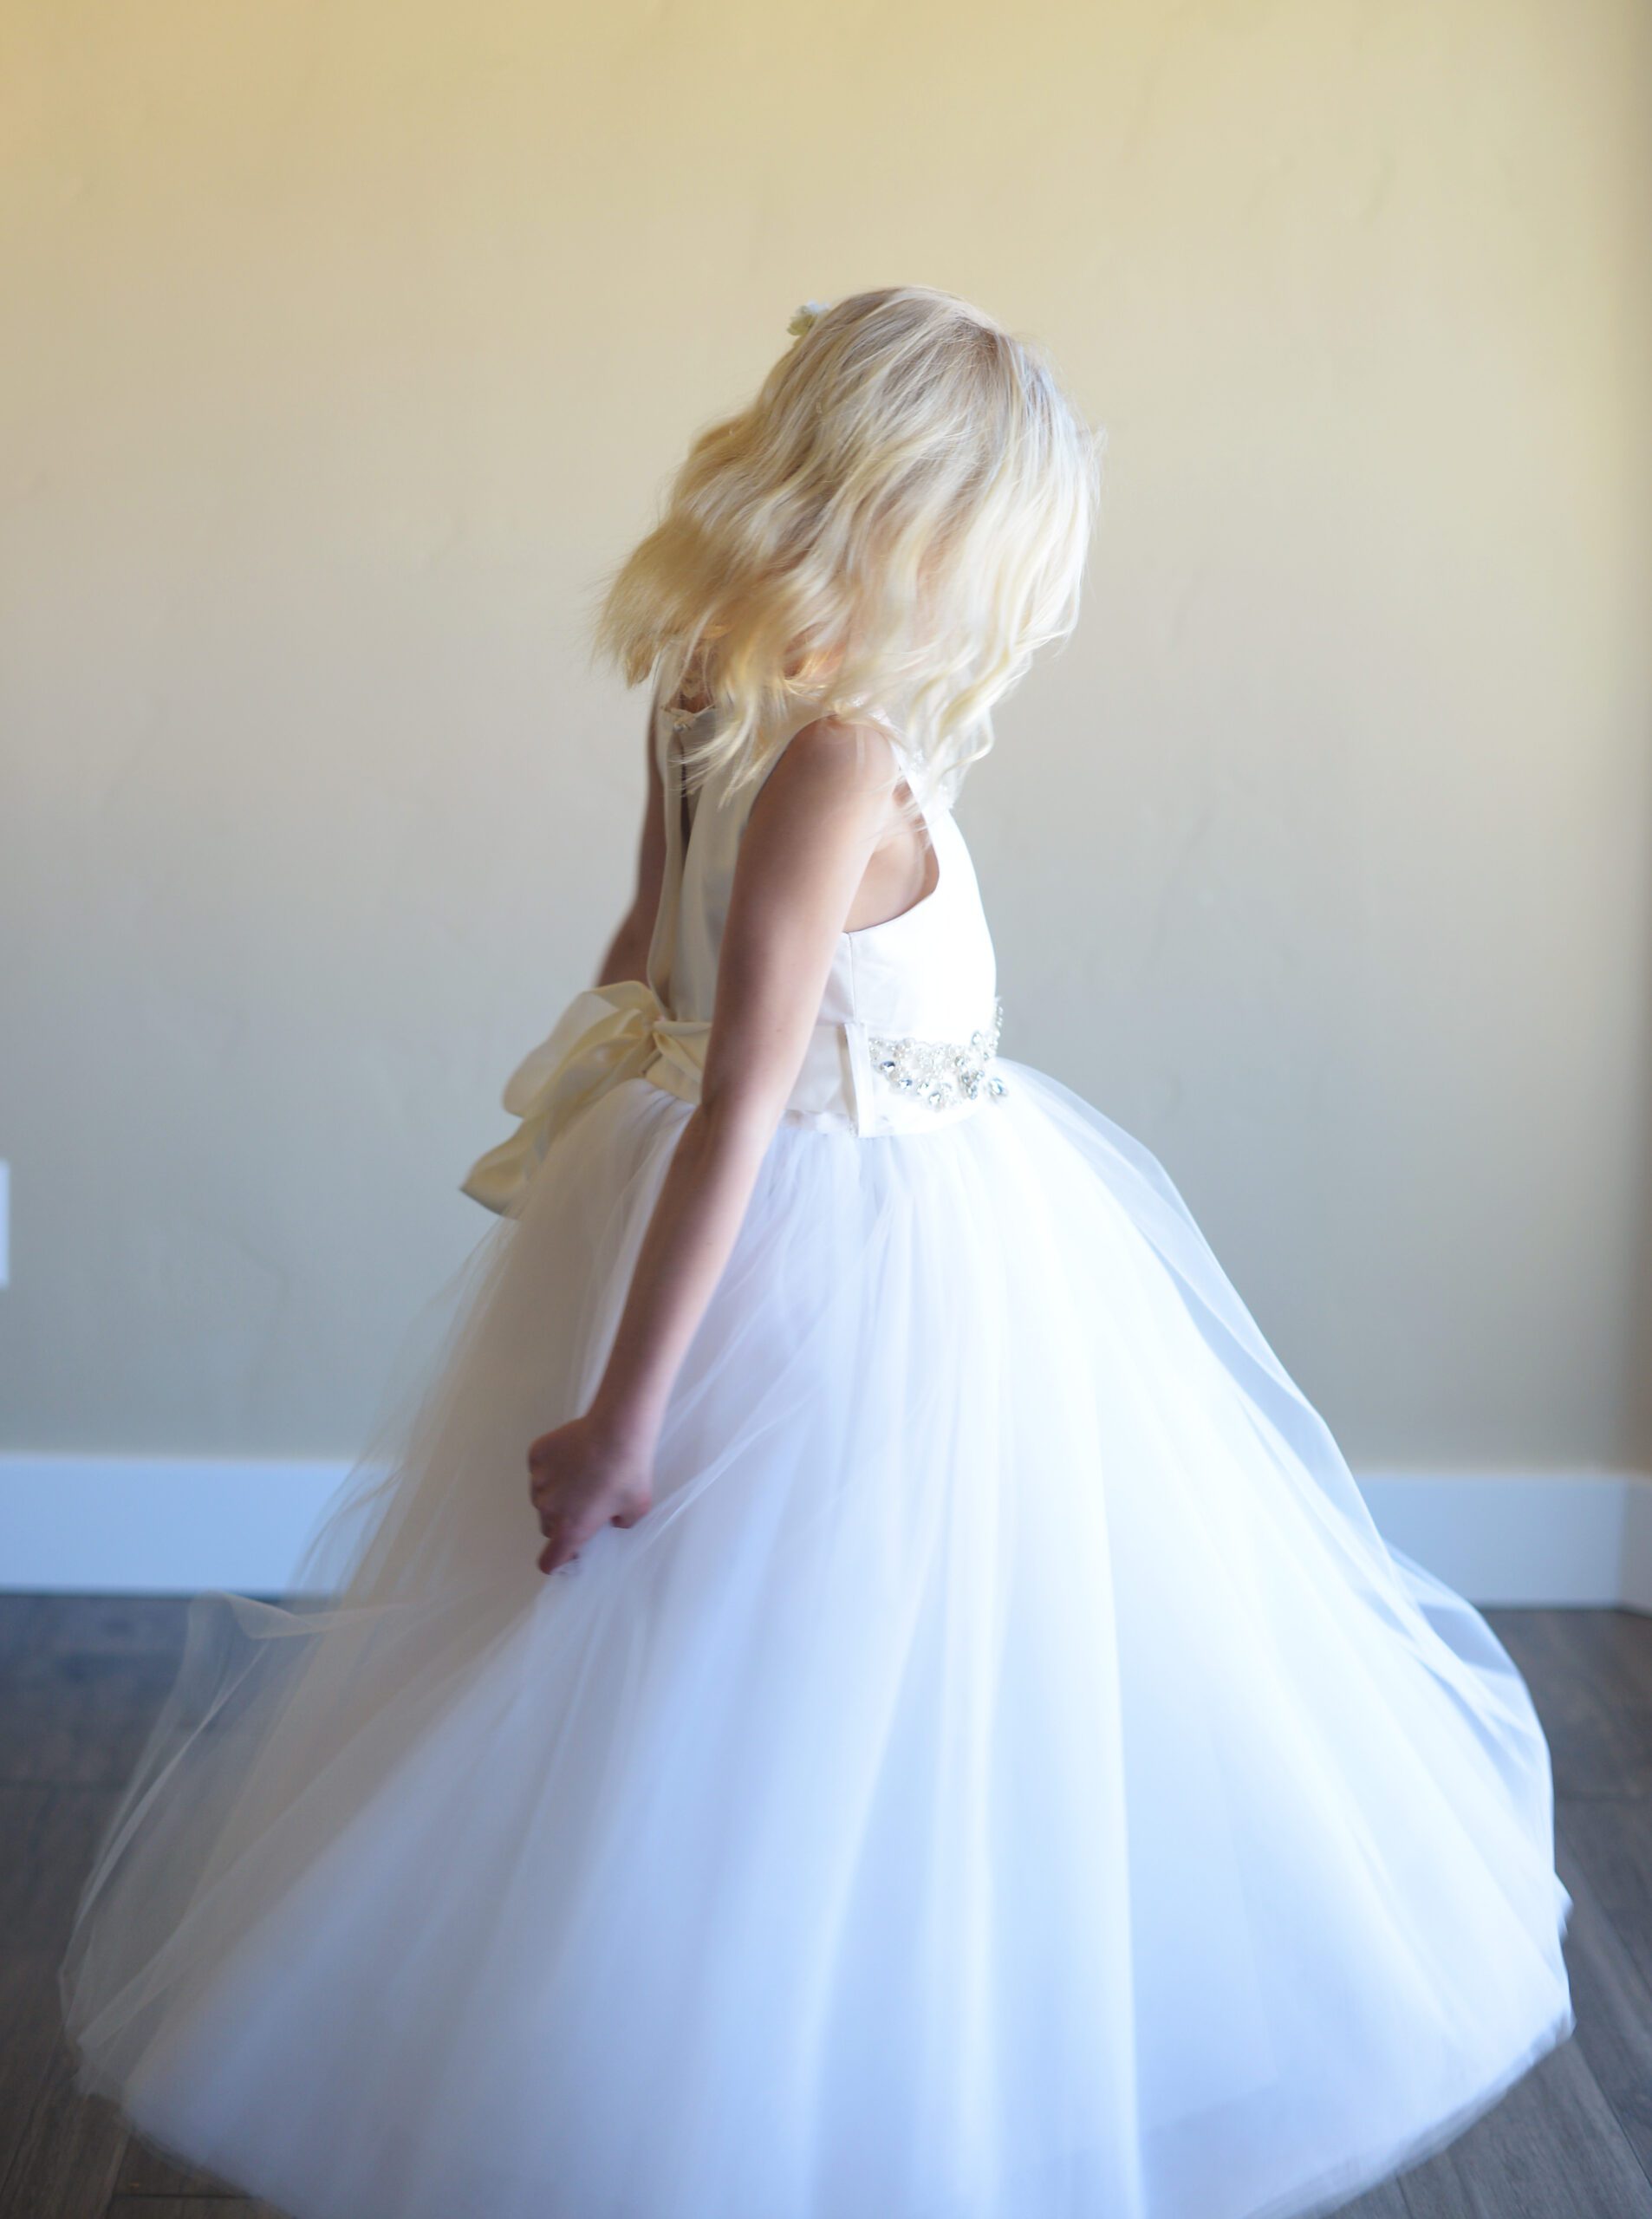 A photo of an 8 year old girl wearing a silk flower girl or first communion dress with a diamante sash